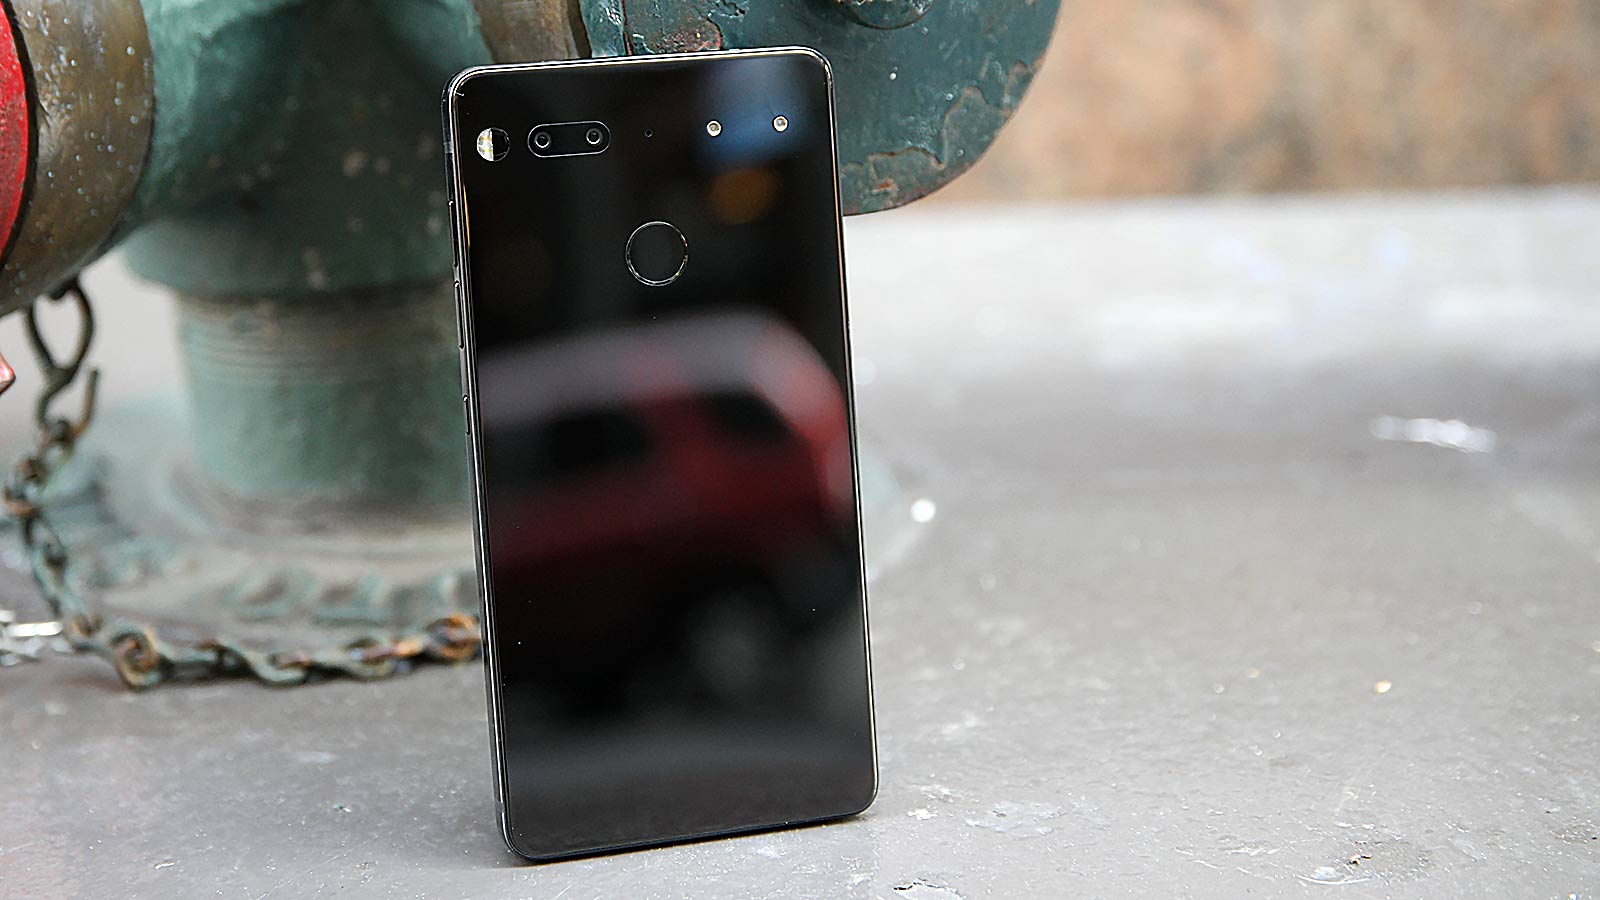 Essential May Be Doomed, But This New Mod Could Make Its Phone Sound Pretty